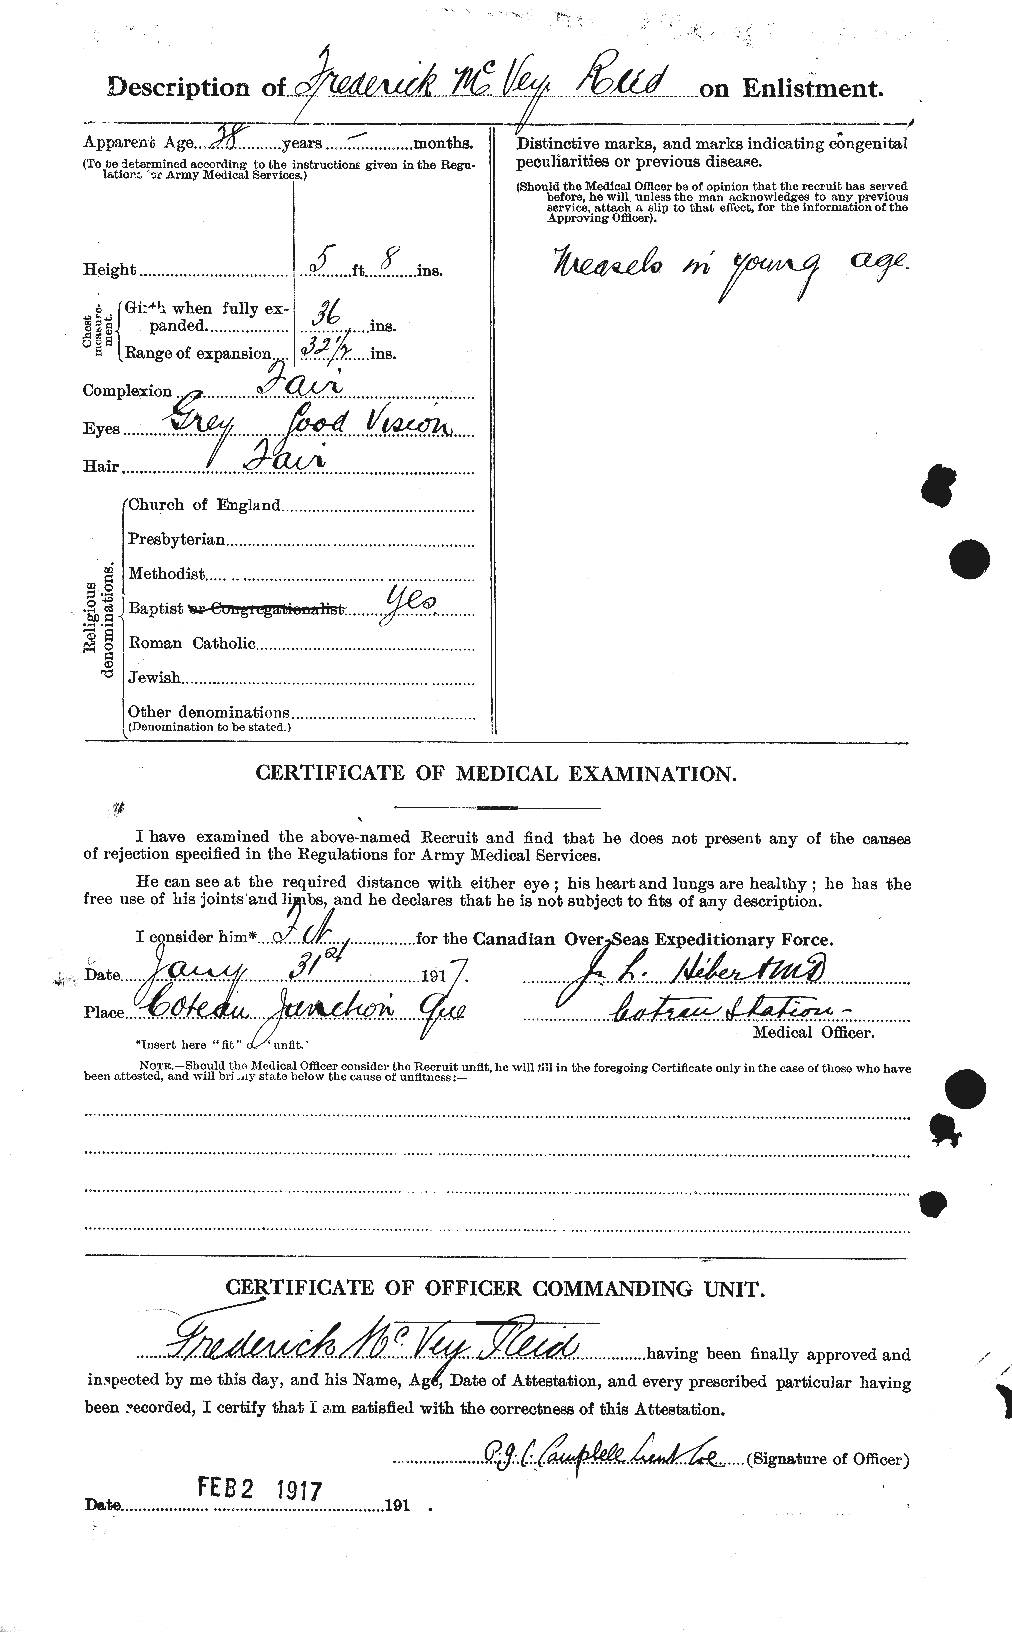 Personnel Records of the First World War - CEF 598059b